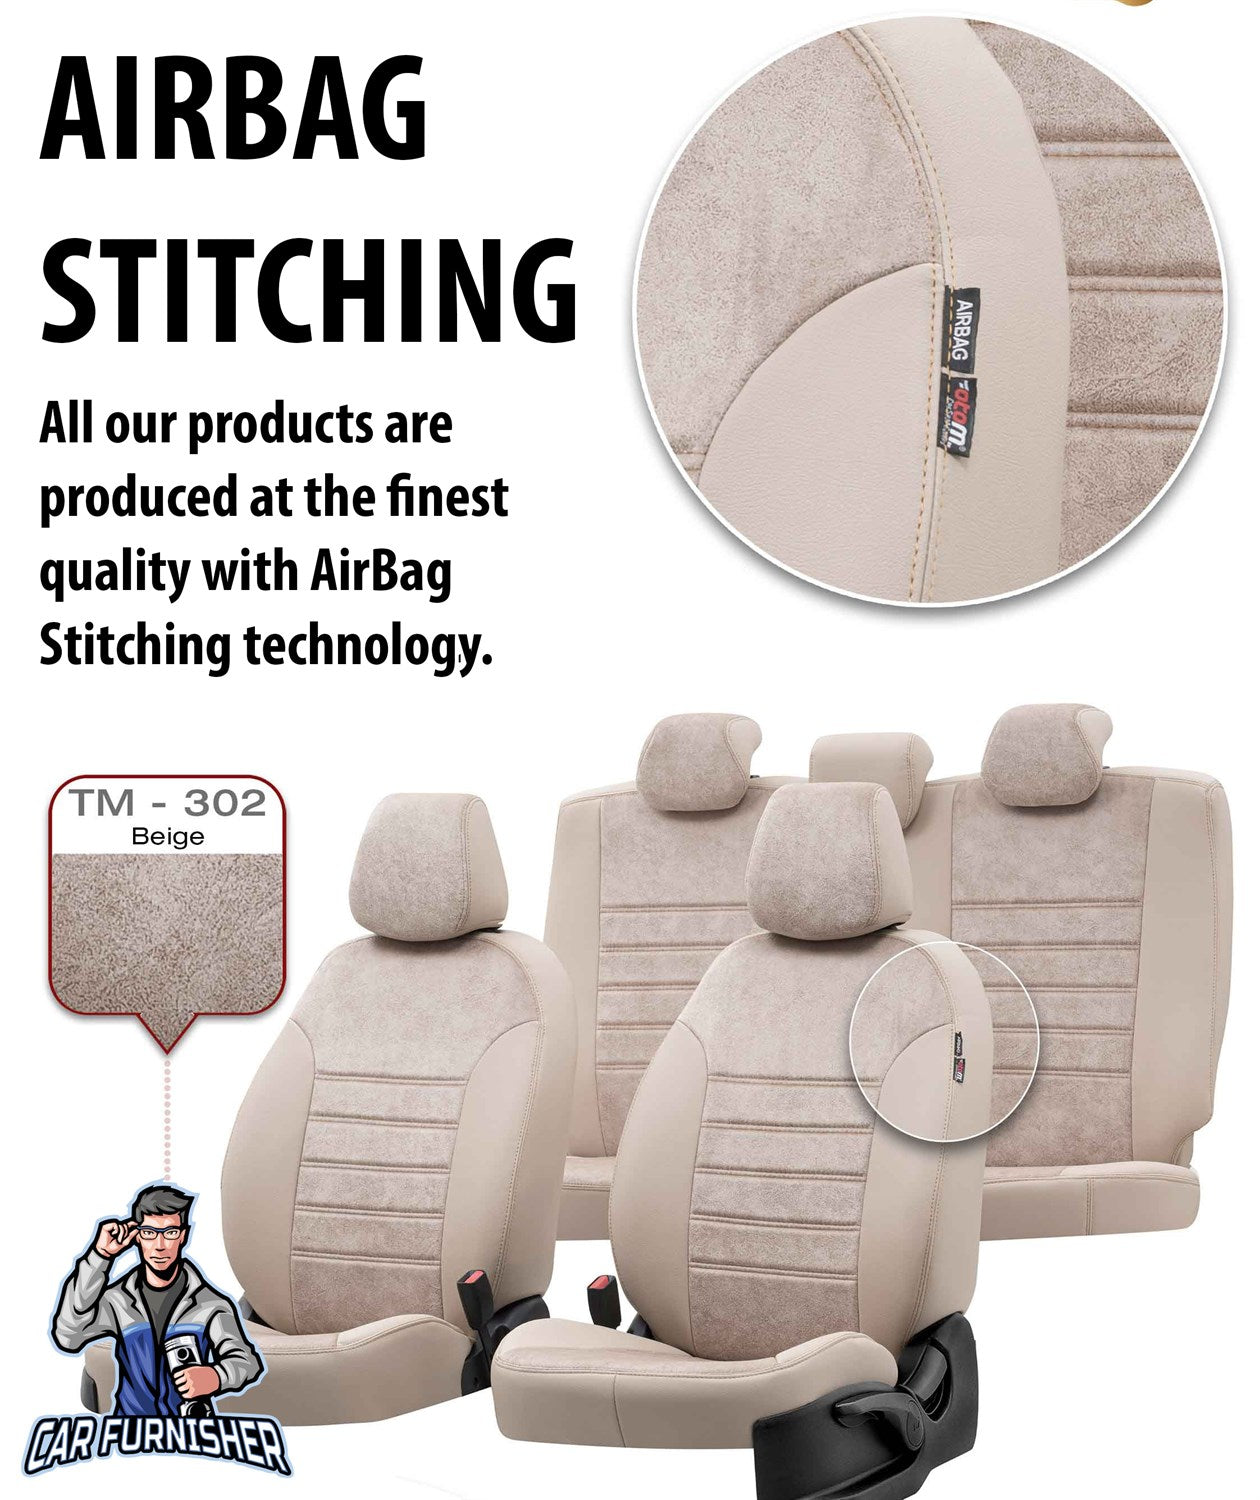 Mitsubishi ASX Seat Covers Milano Suede Design Smoked Black Leather & Suede Fabric